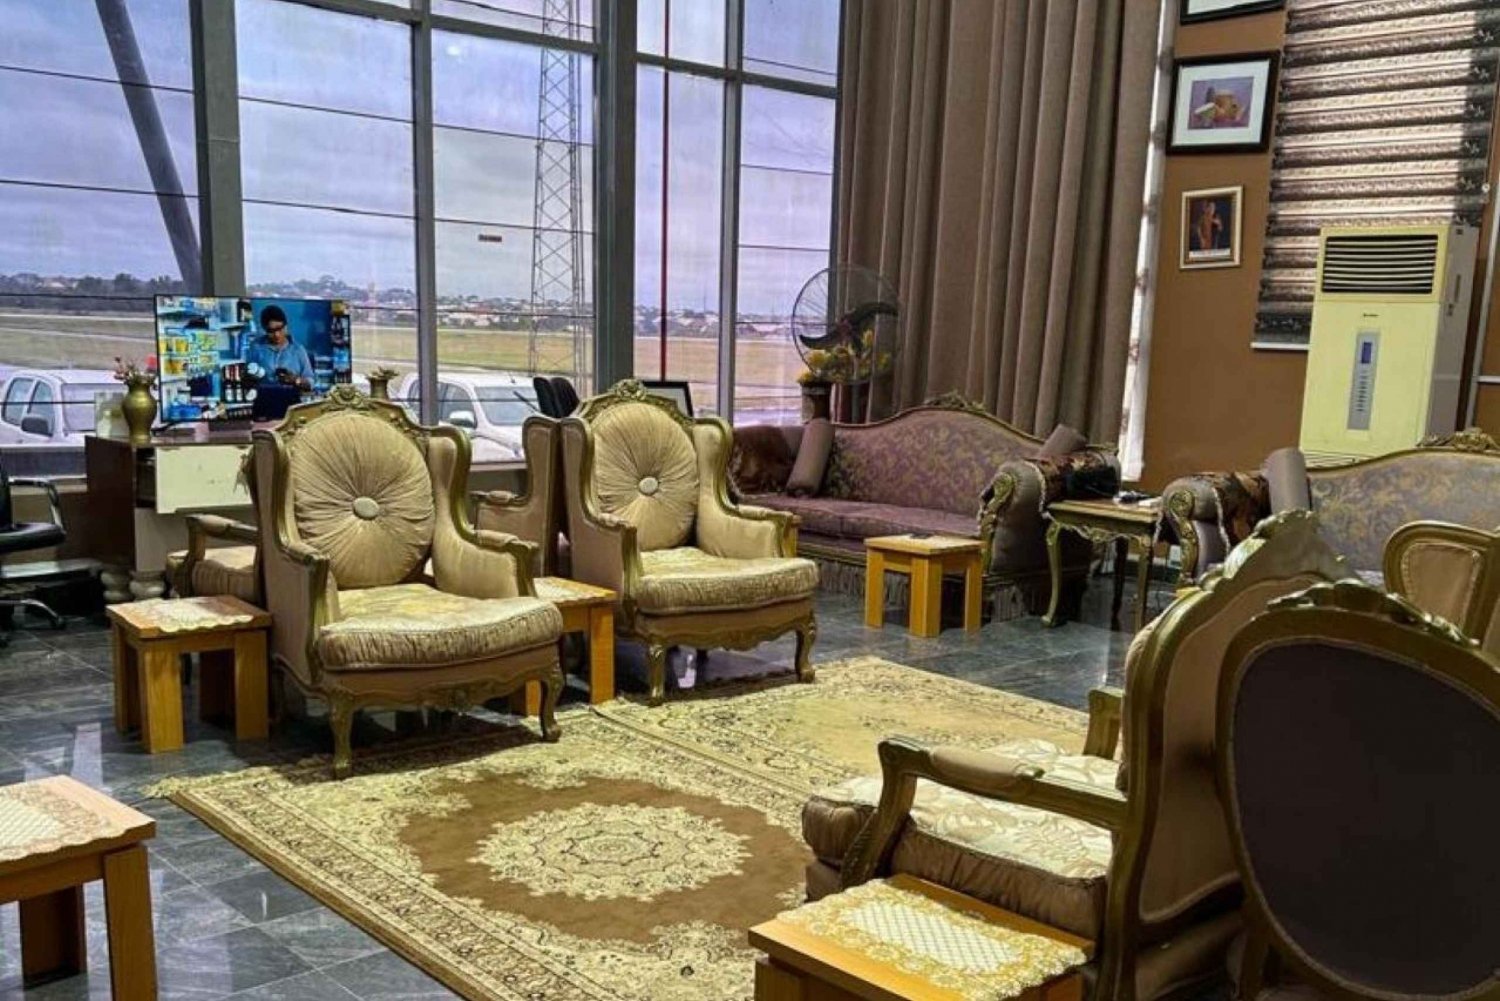 Enugu: Access to airport lounge